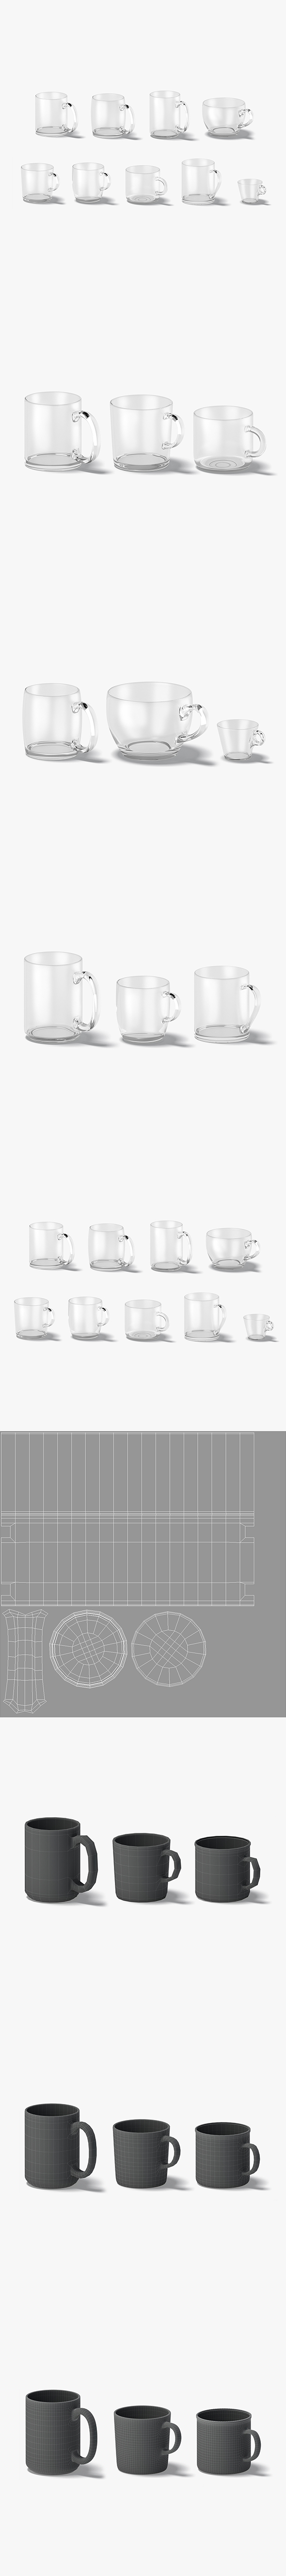 [DOWNLOAD]9 Glass Mug Shapes - transparent mugs various forms and sizes